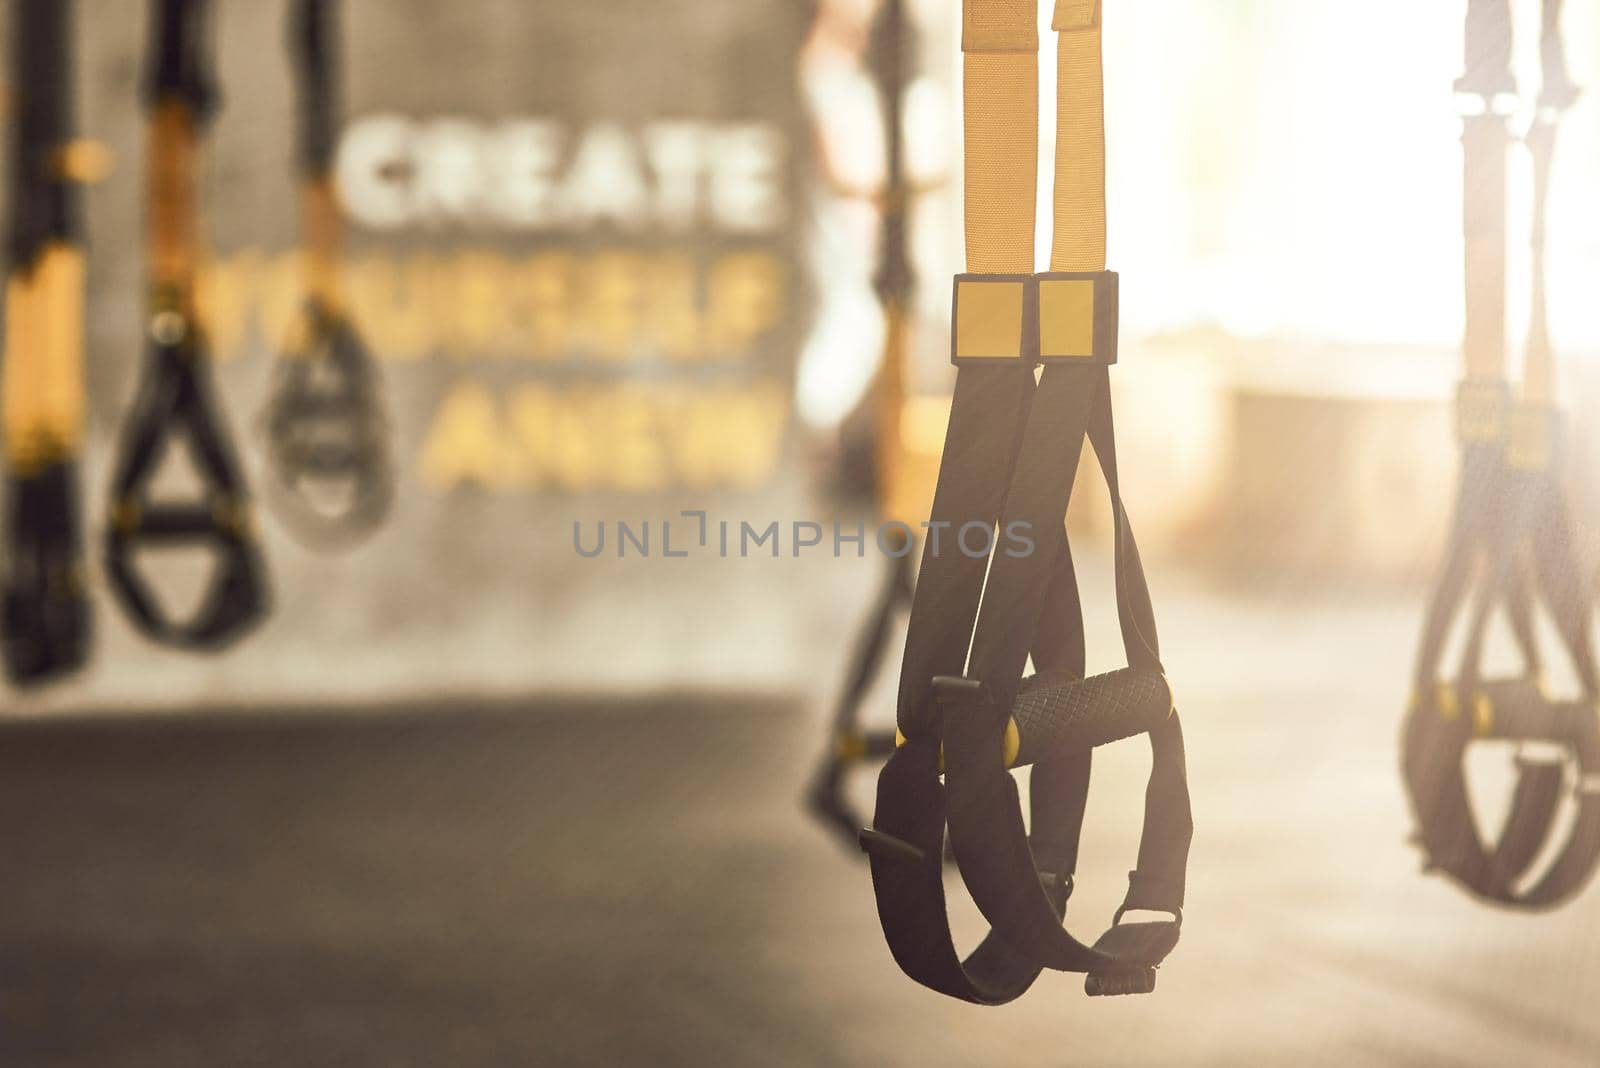 Fitness trx straps inside of a gym, functional training equipment and sport accessories by friendsstock